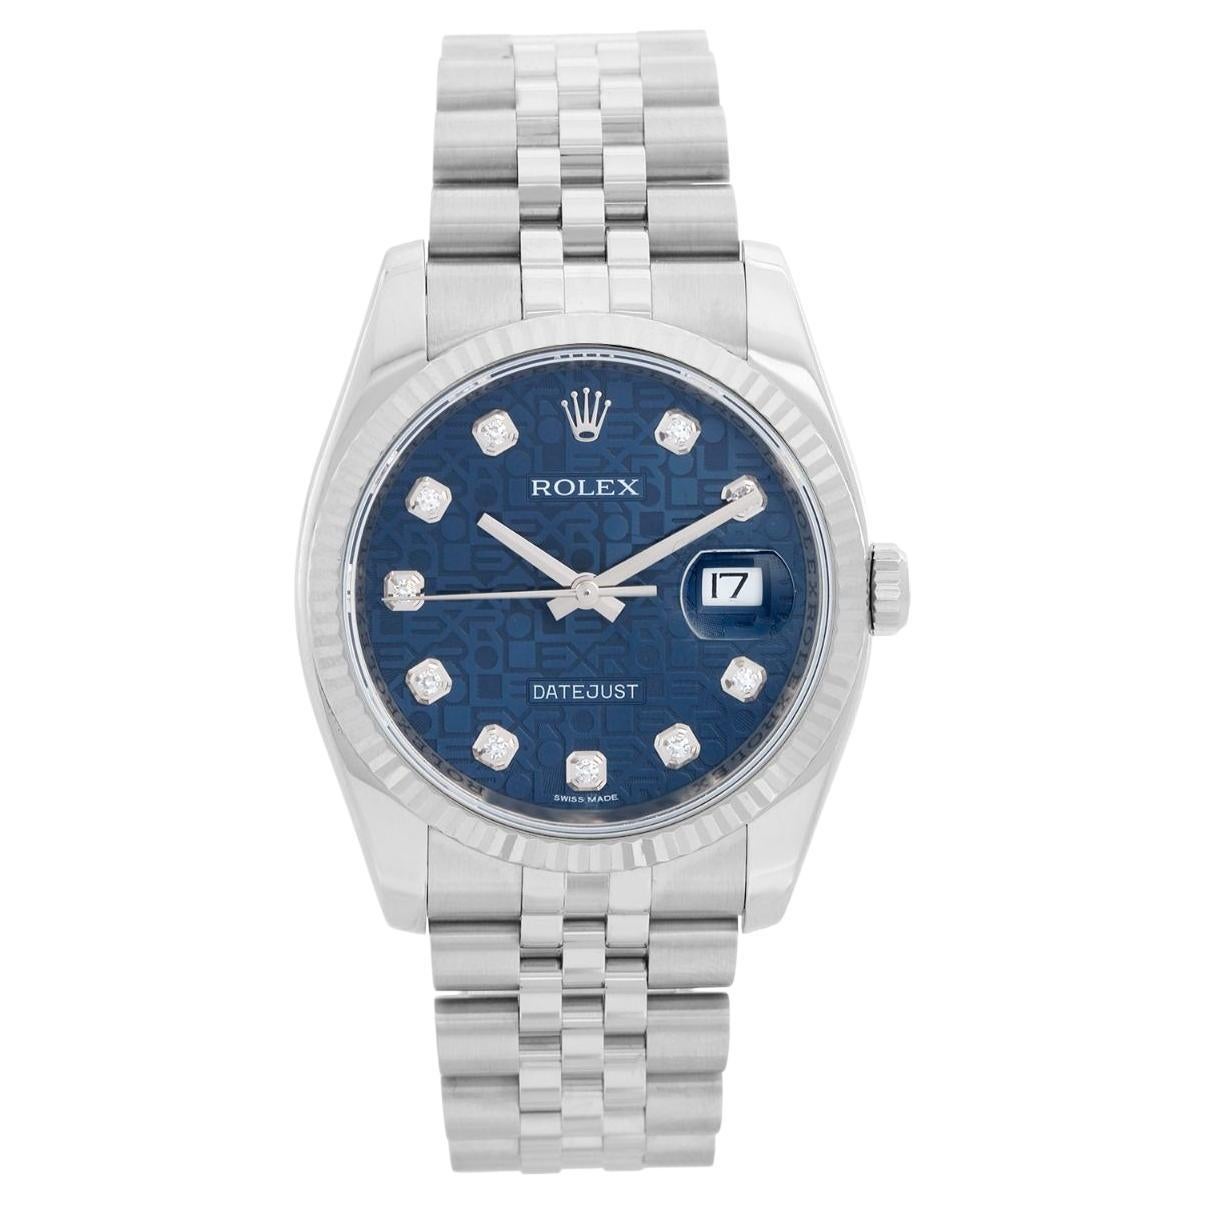 Rolex Datejust Men's Stainless Steel Watch 116234 For Sale